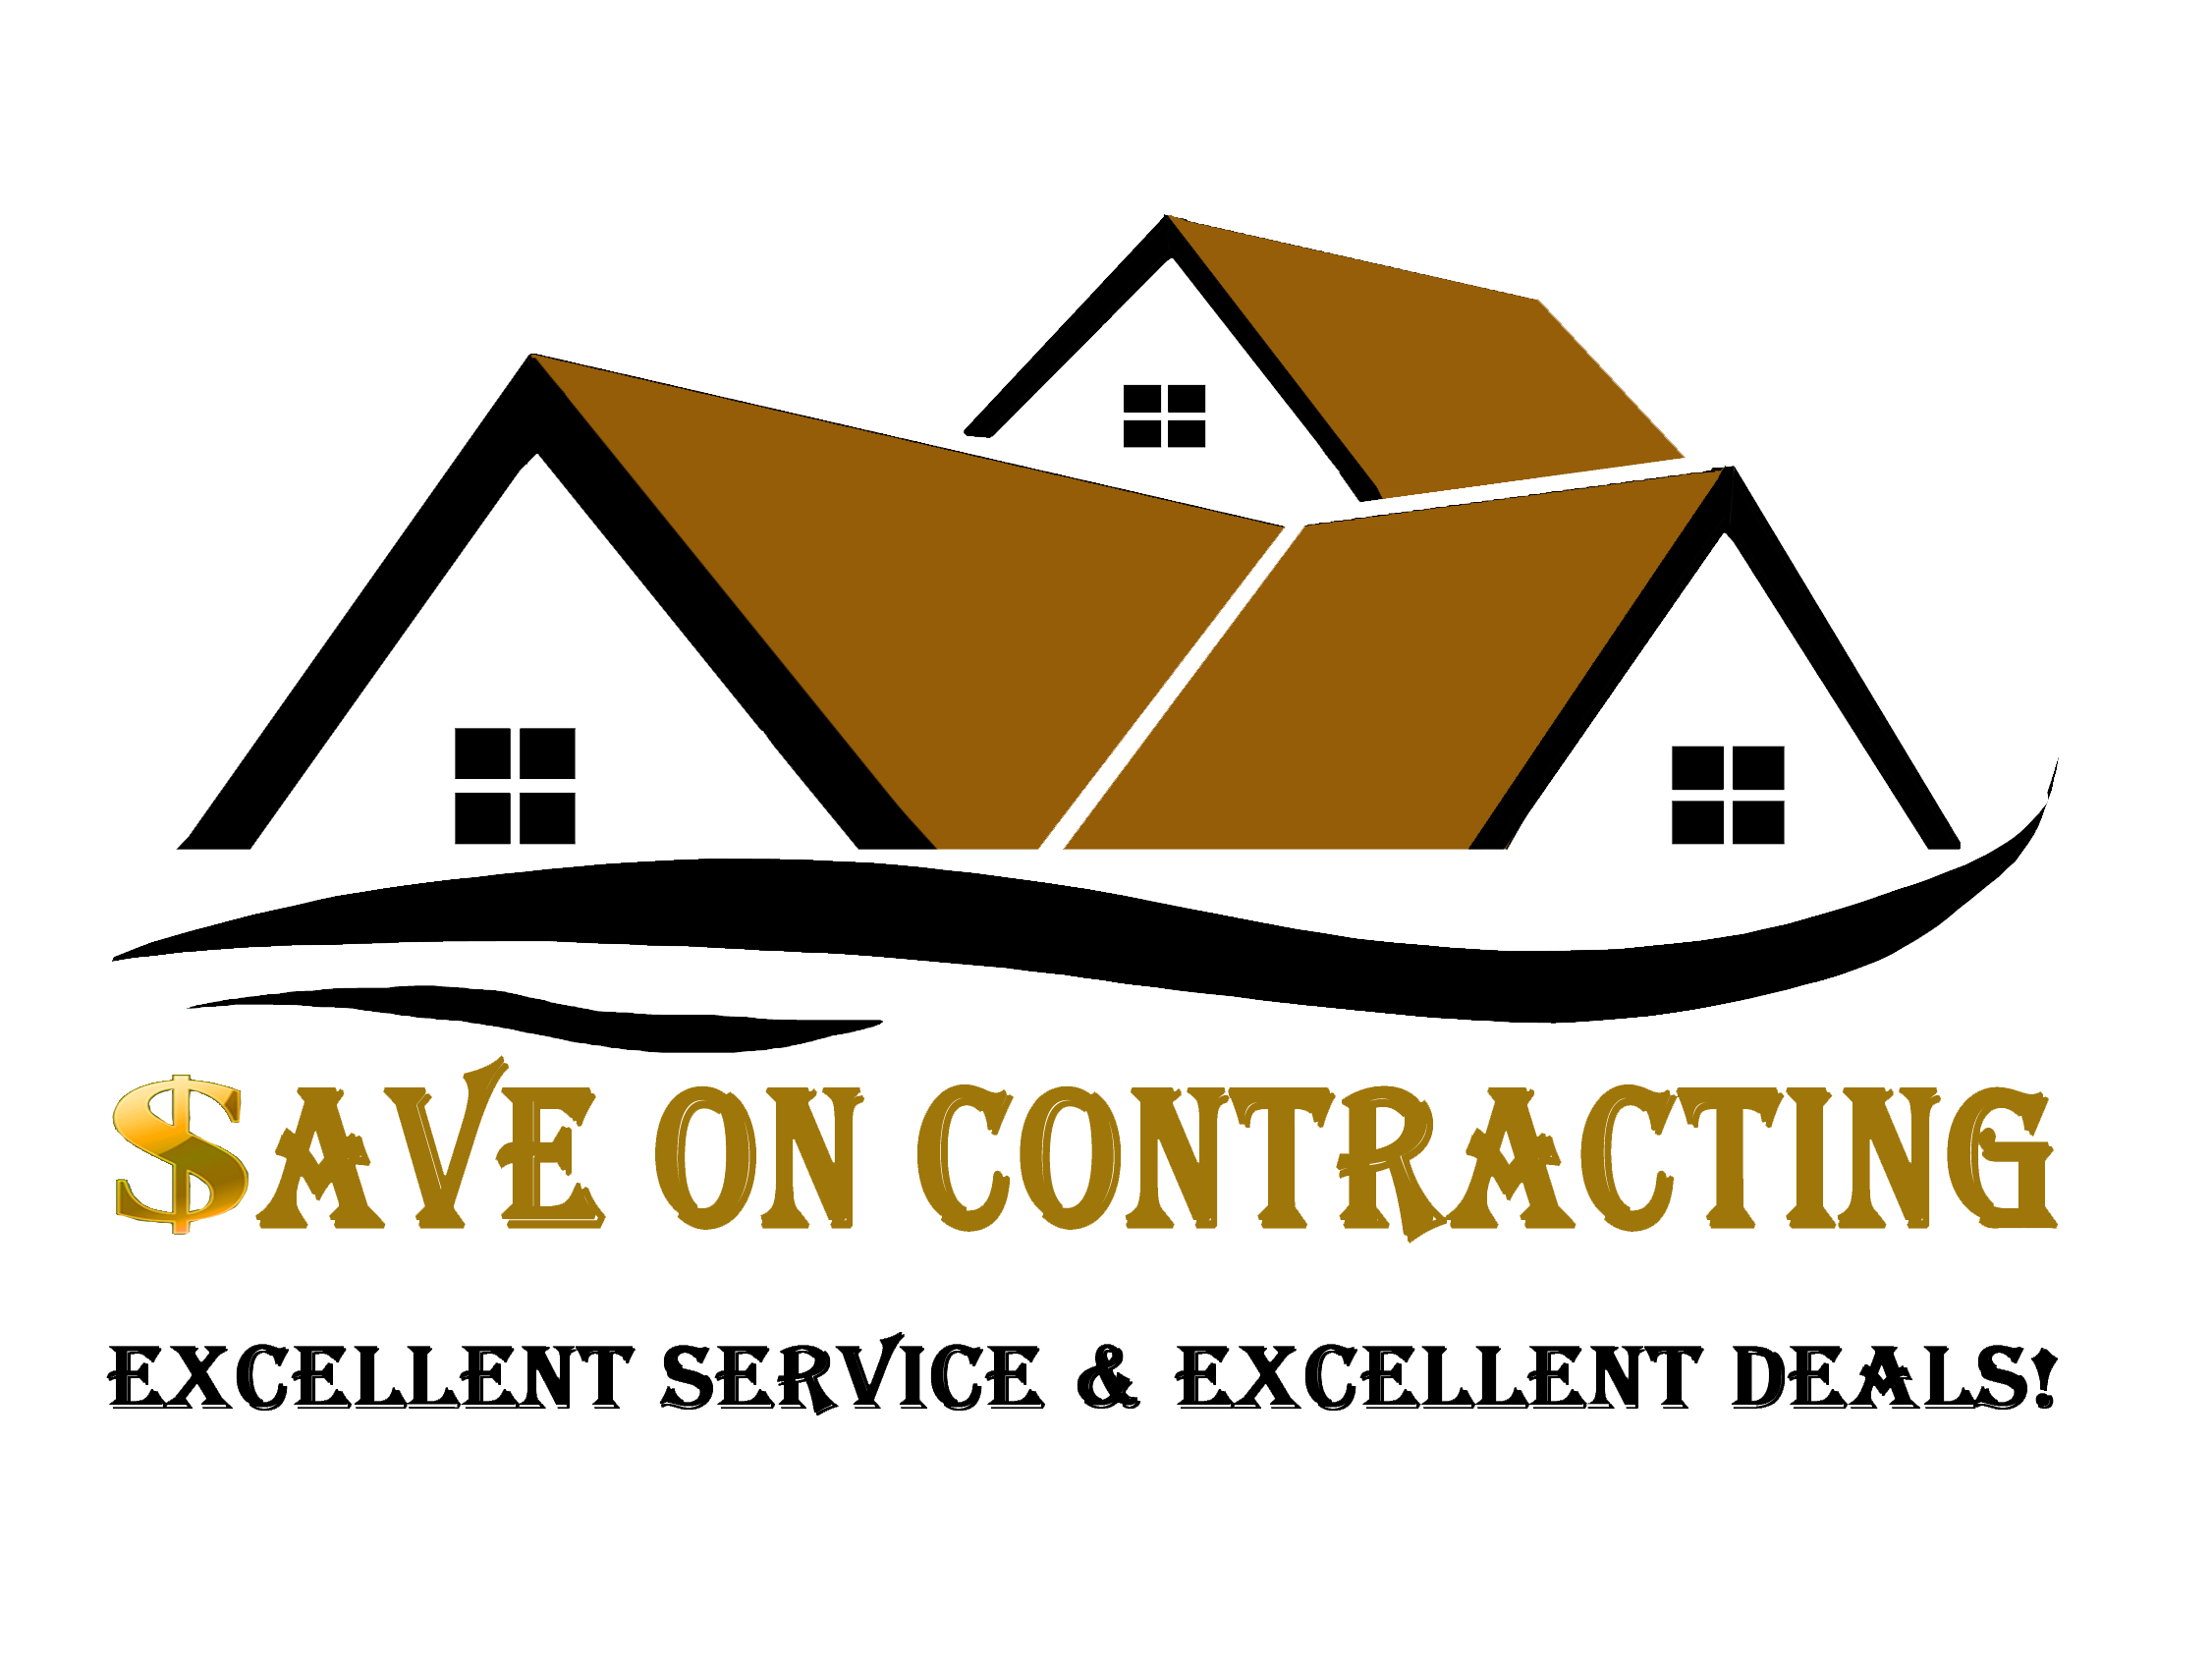 Save On Contracting's logo